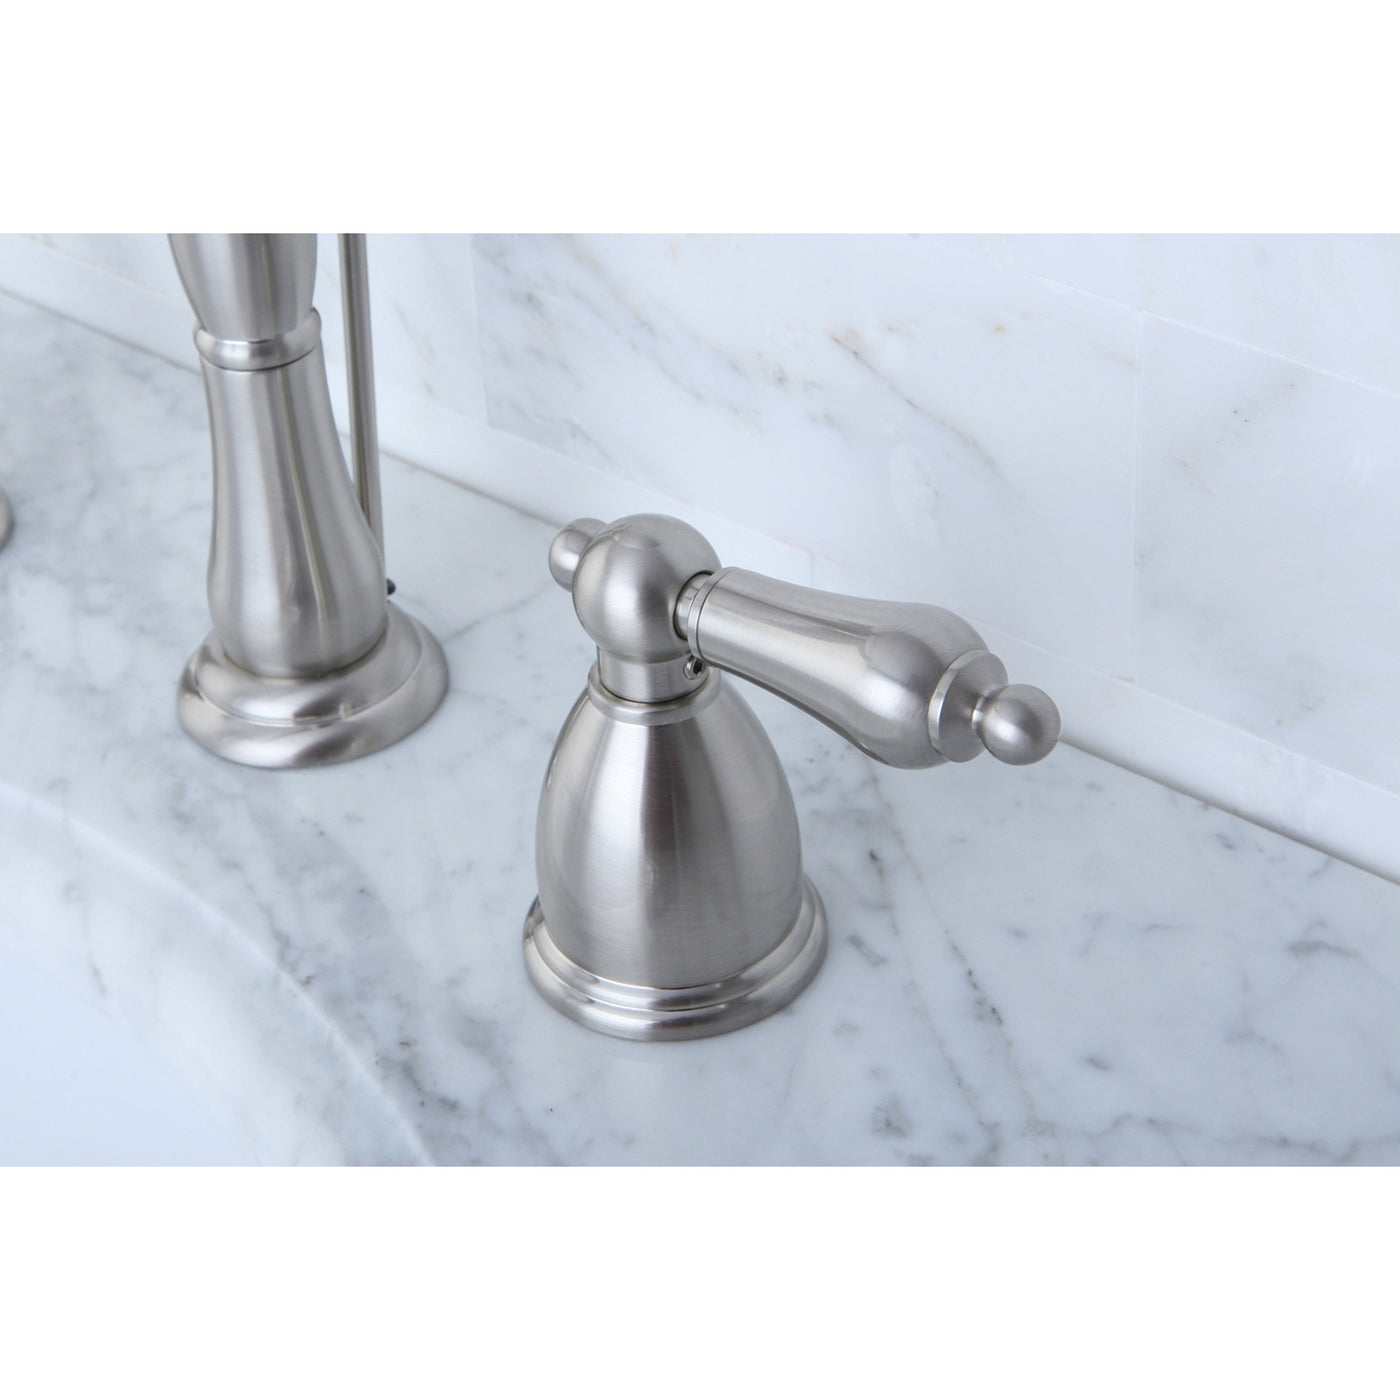 Elements of Design EB1978AL Widespread Bathroom Faucet with Plastic Pop-Up, Brushed Nickel